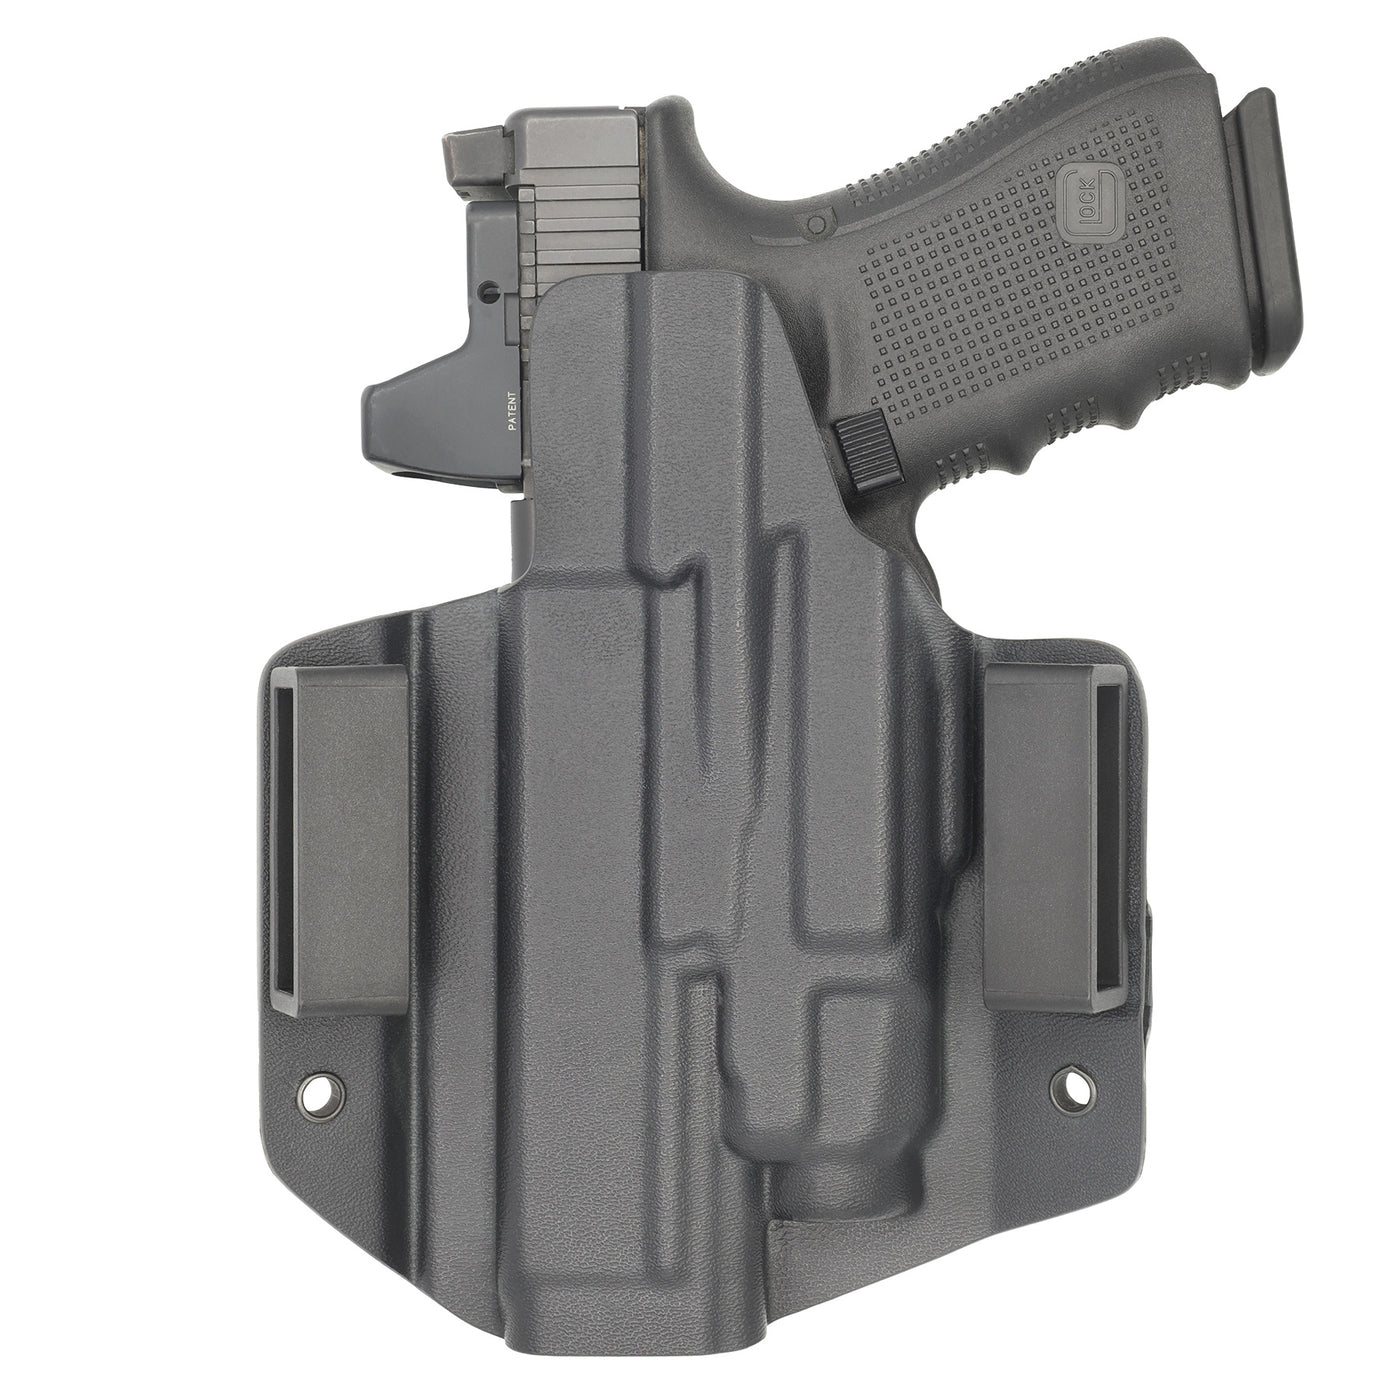 C&G Holsters quickship OWB Tactical Poly80 c/v2 Streamlight TLR7/a in holstered position back view